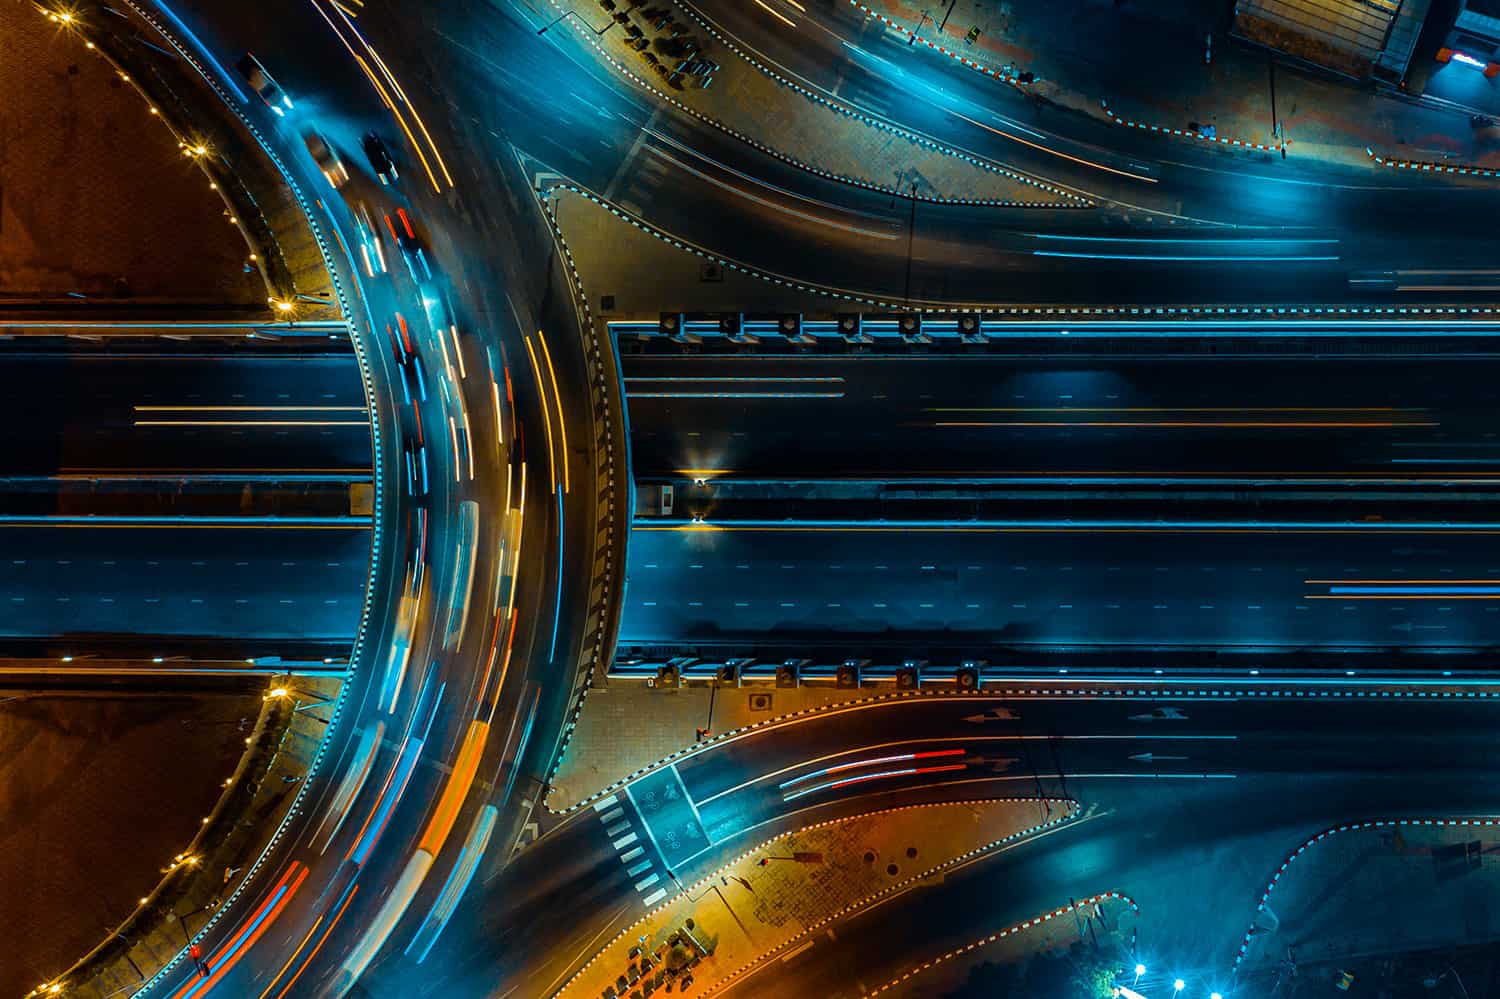 Overhead view of a multi-lane highway interchange at night with light trails of moving vehicles.